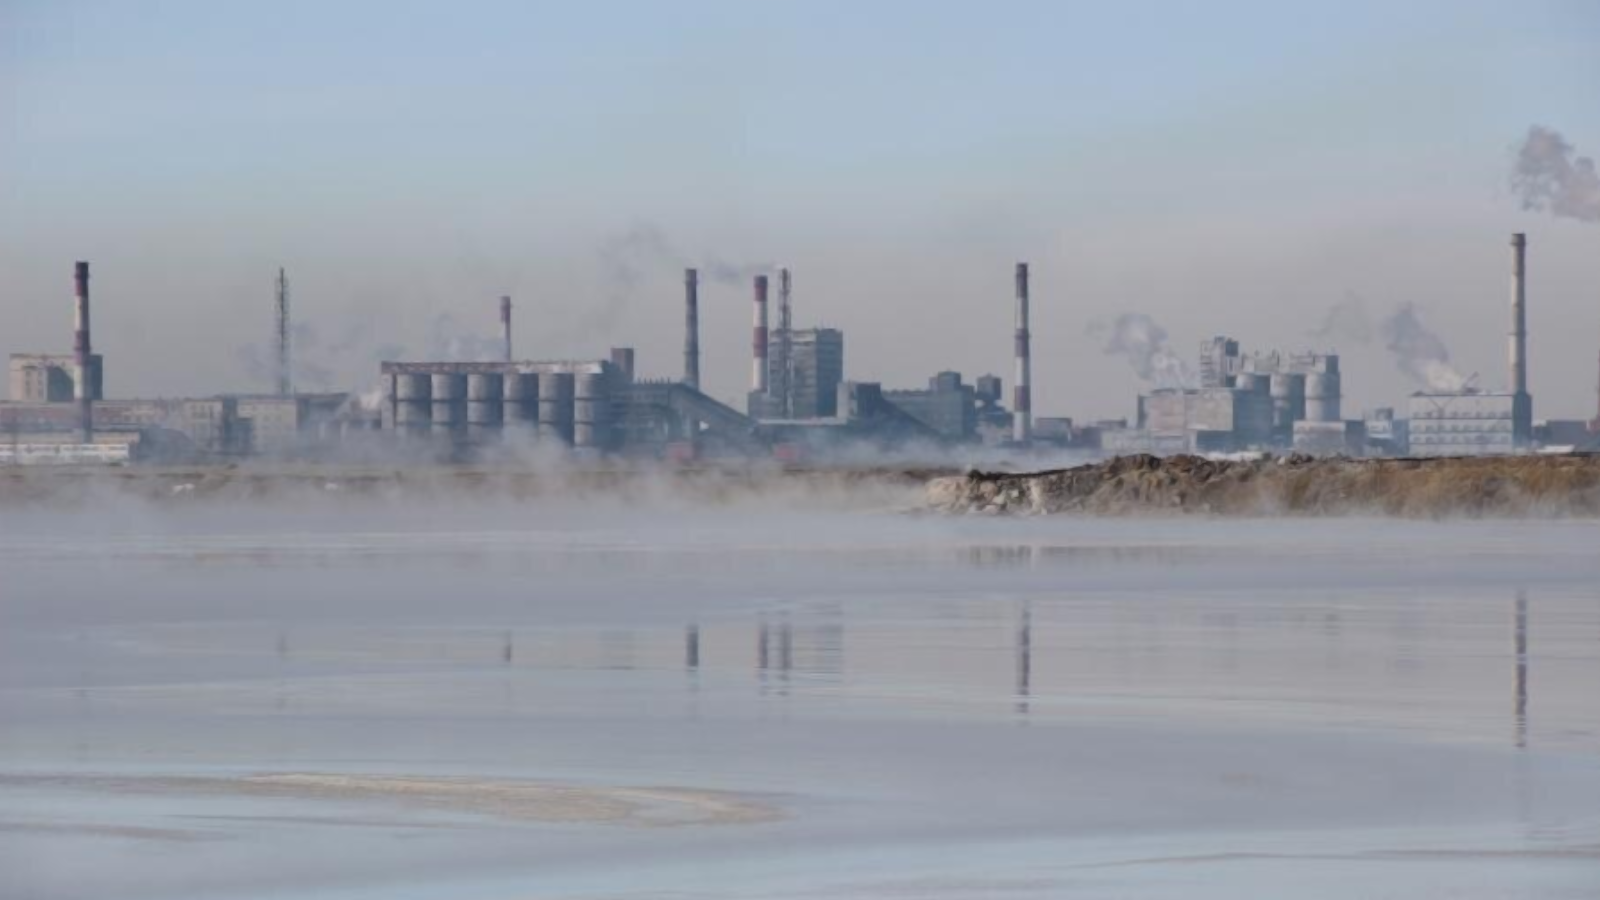 The Bashkir Soda Company discharges pollutants into the Belaya river legally, a Russian court has decided